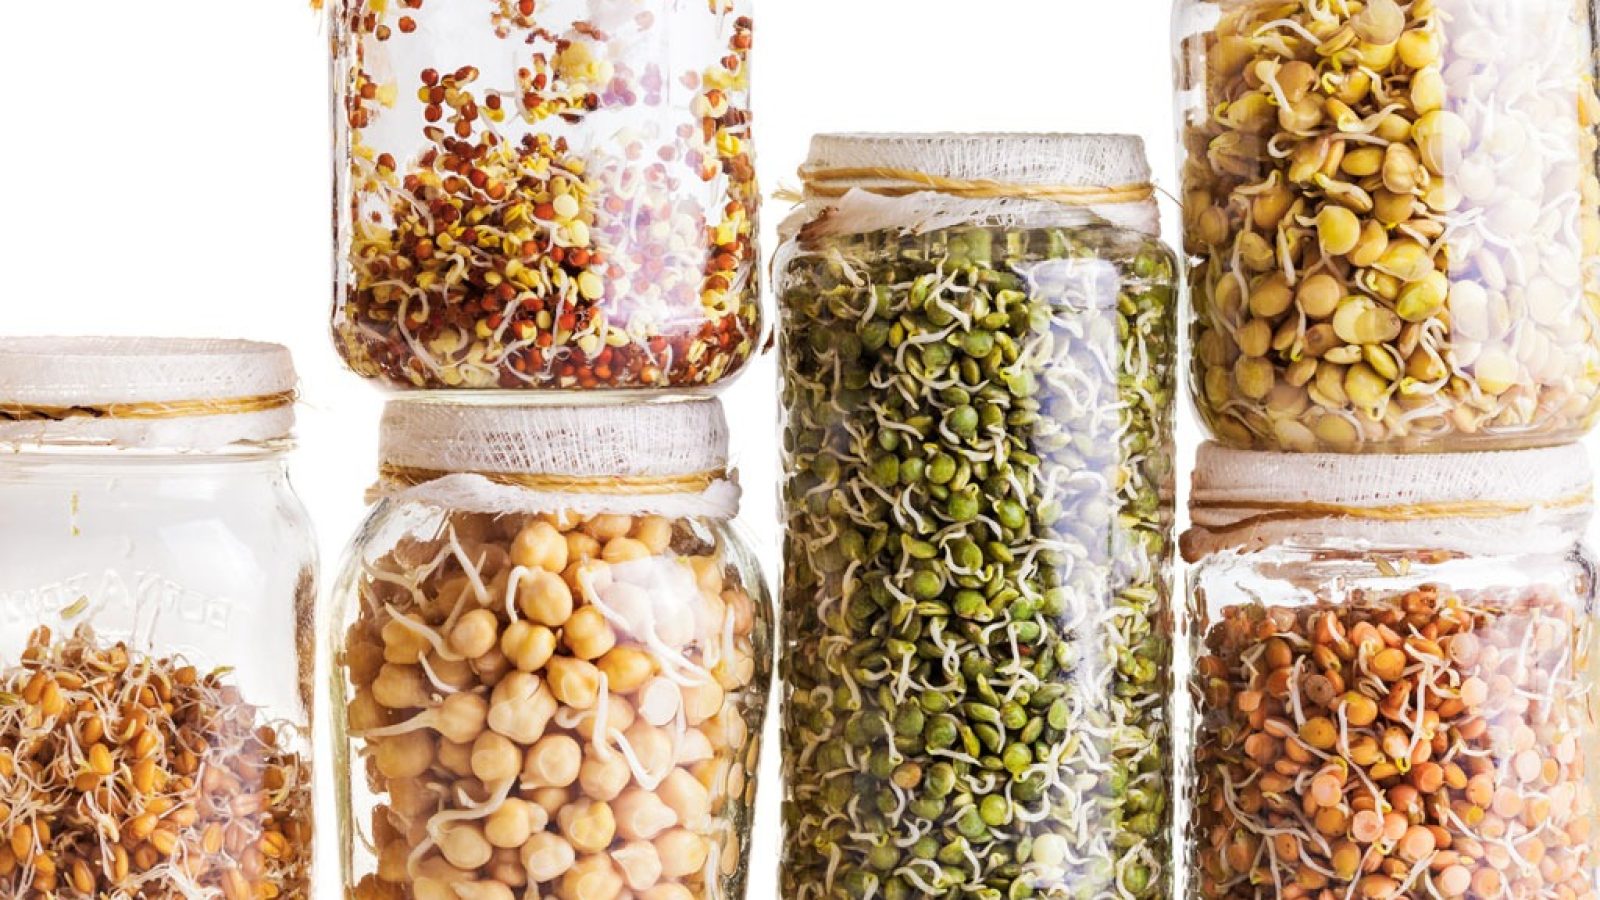 Sprouted Foods, Benefits, and How to Sprout Food | Eat This Not That